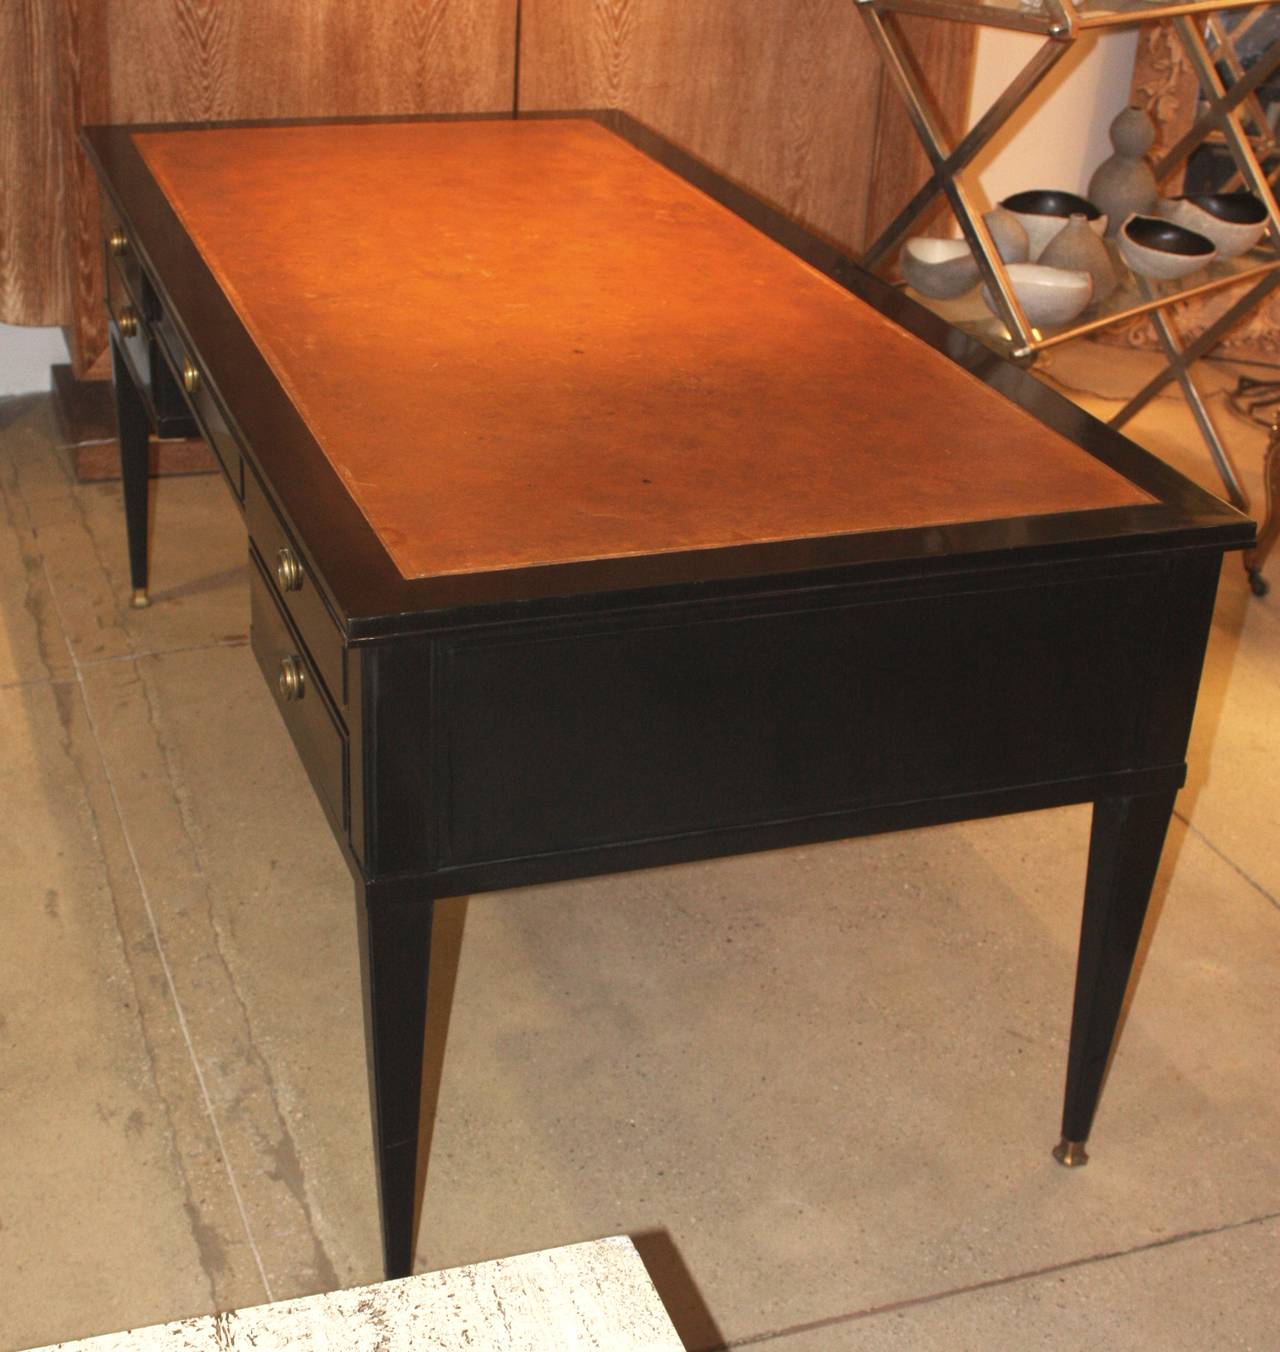 A chic 1940s Louis XVI style bureau plat in black lacquer with inset light brown tooled leather top and brass drawer pulls and sabots. The desk is by Nordiska Kompaniet and is signed in the center drawer. It has five drawers on one side and two